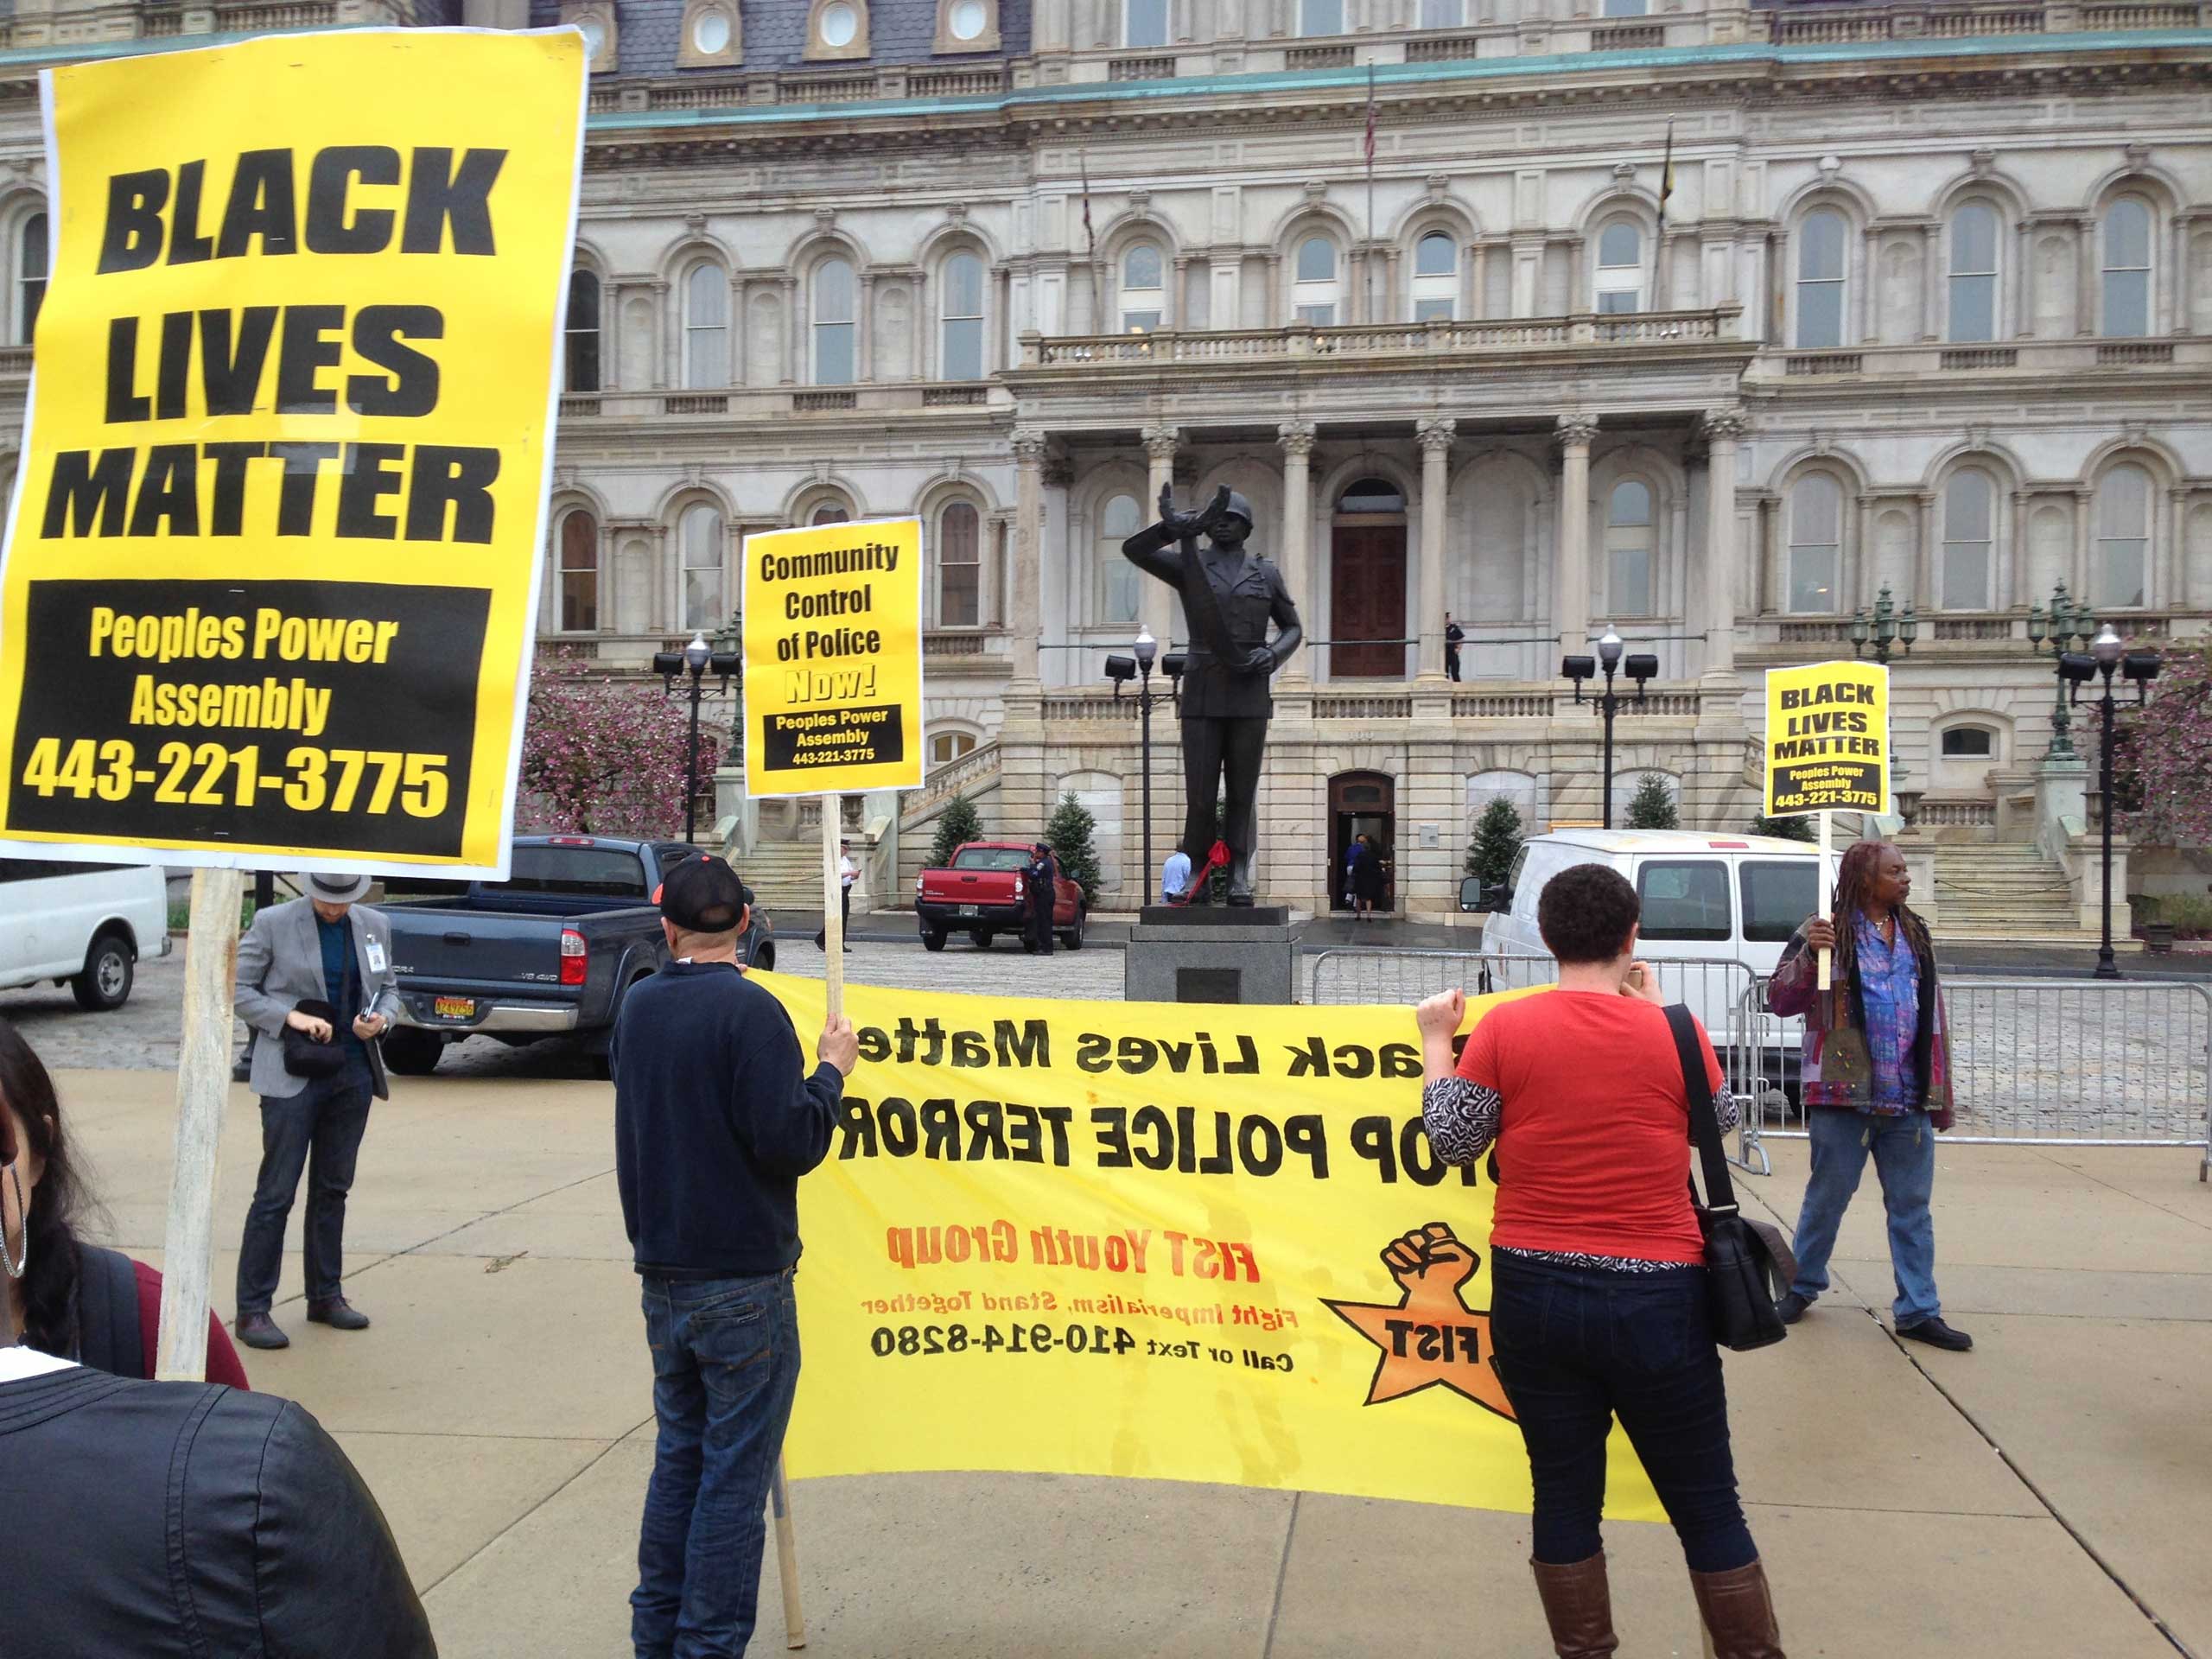 Demonstrators protest the death of Freddie Gray outside Baltimore City Hall on April 20, 2015. (David Dishneau—AP)